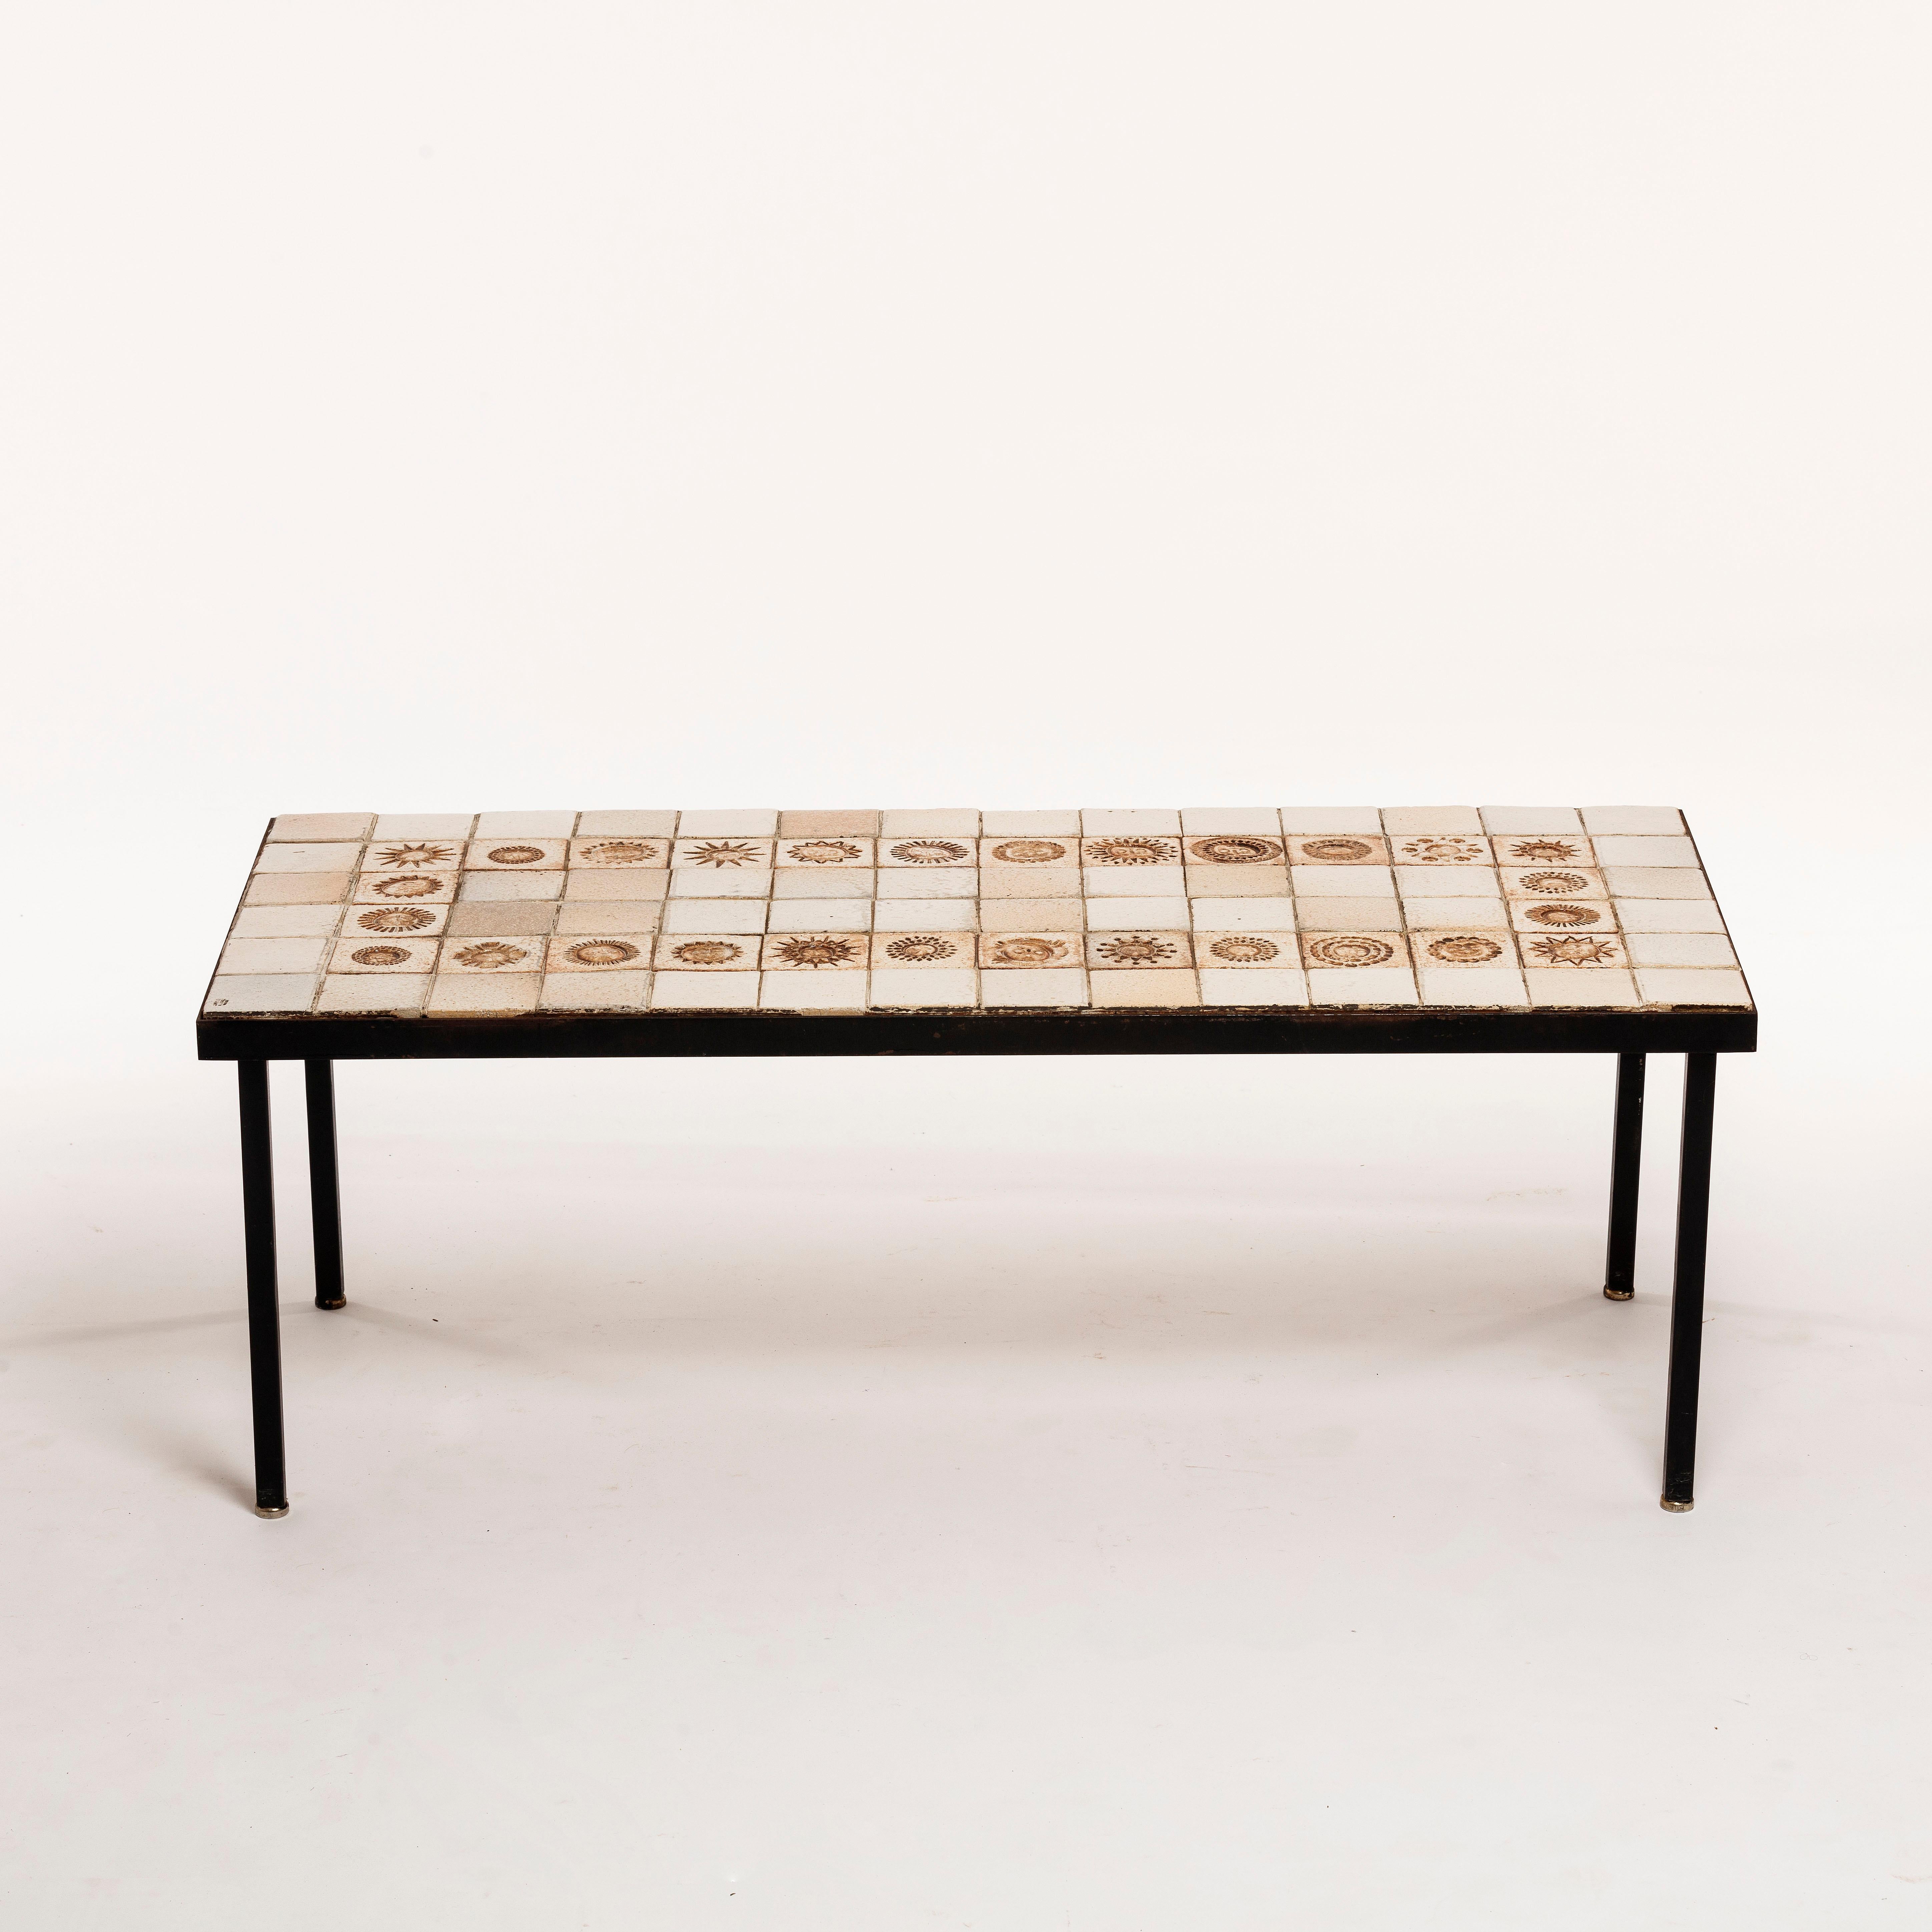 Very rare ceramic coffee table by designer Roger Capron, 1960s. The structure is in black metal and the top in white variation with 26 differents small suns engraved on enamelled ceramic tiles.

The table is signed and in good condition.